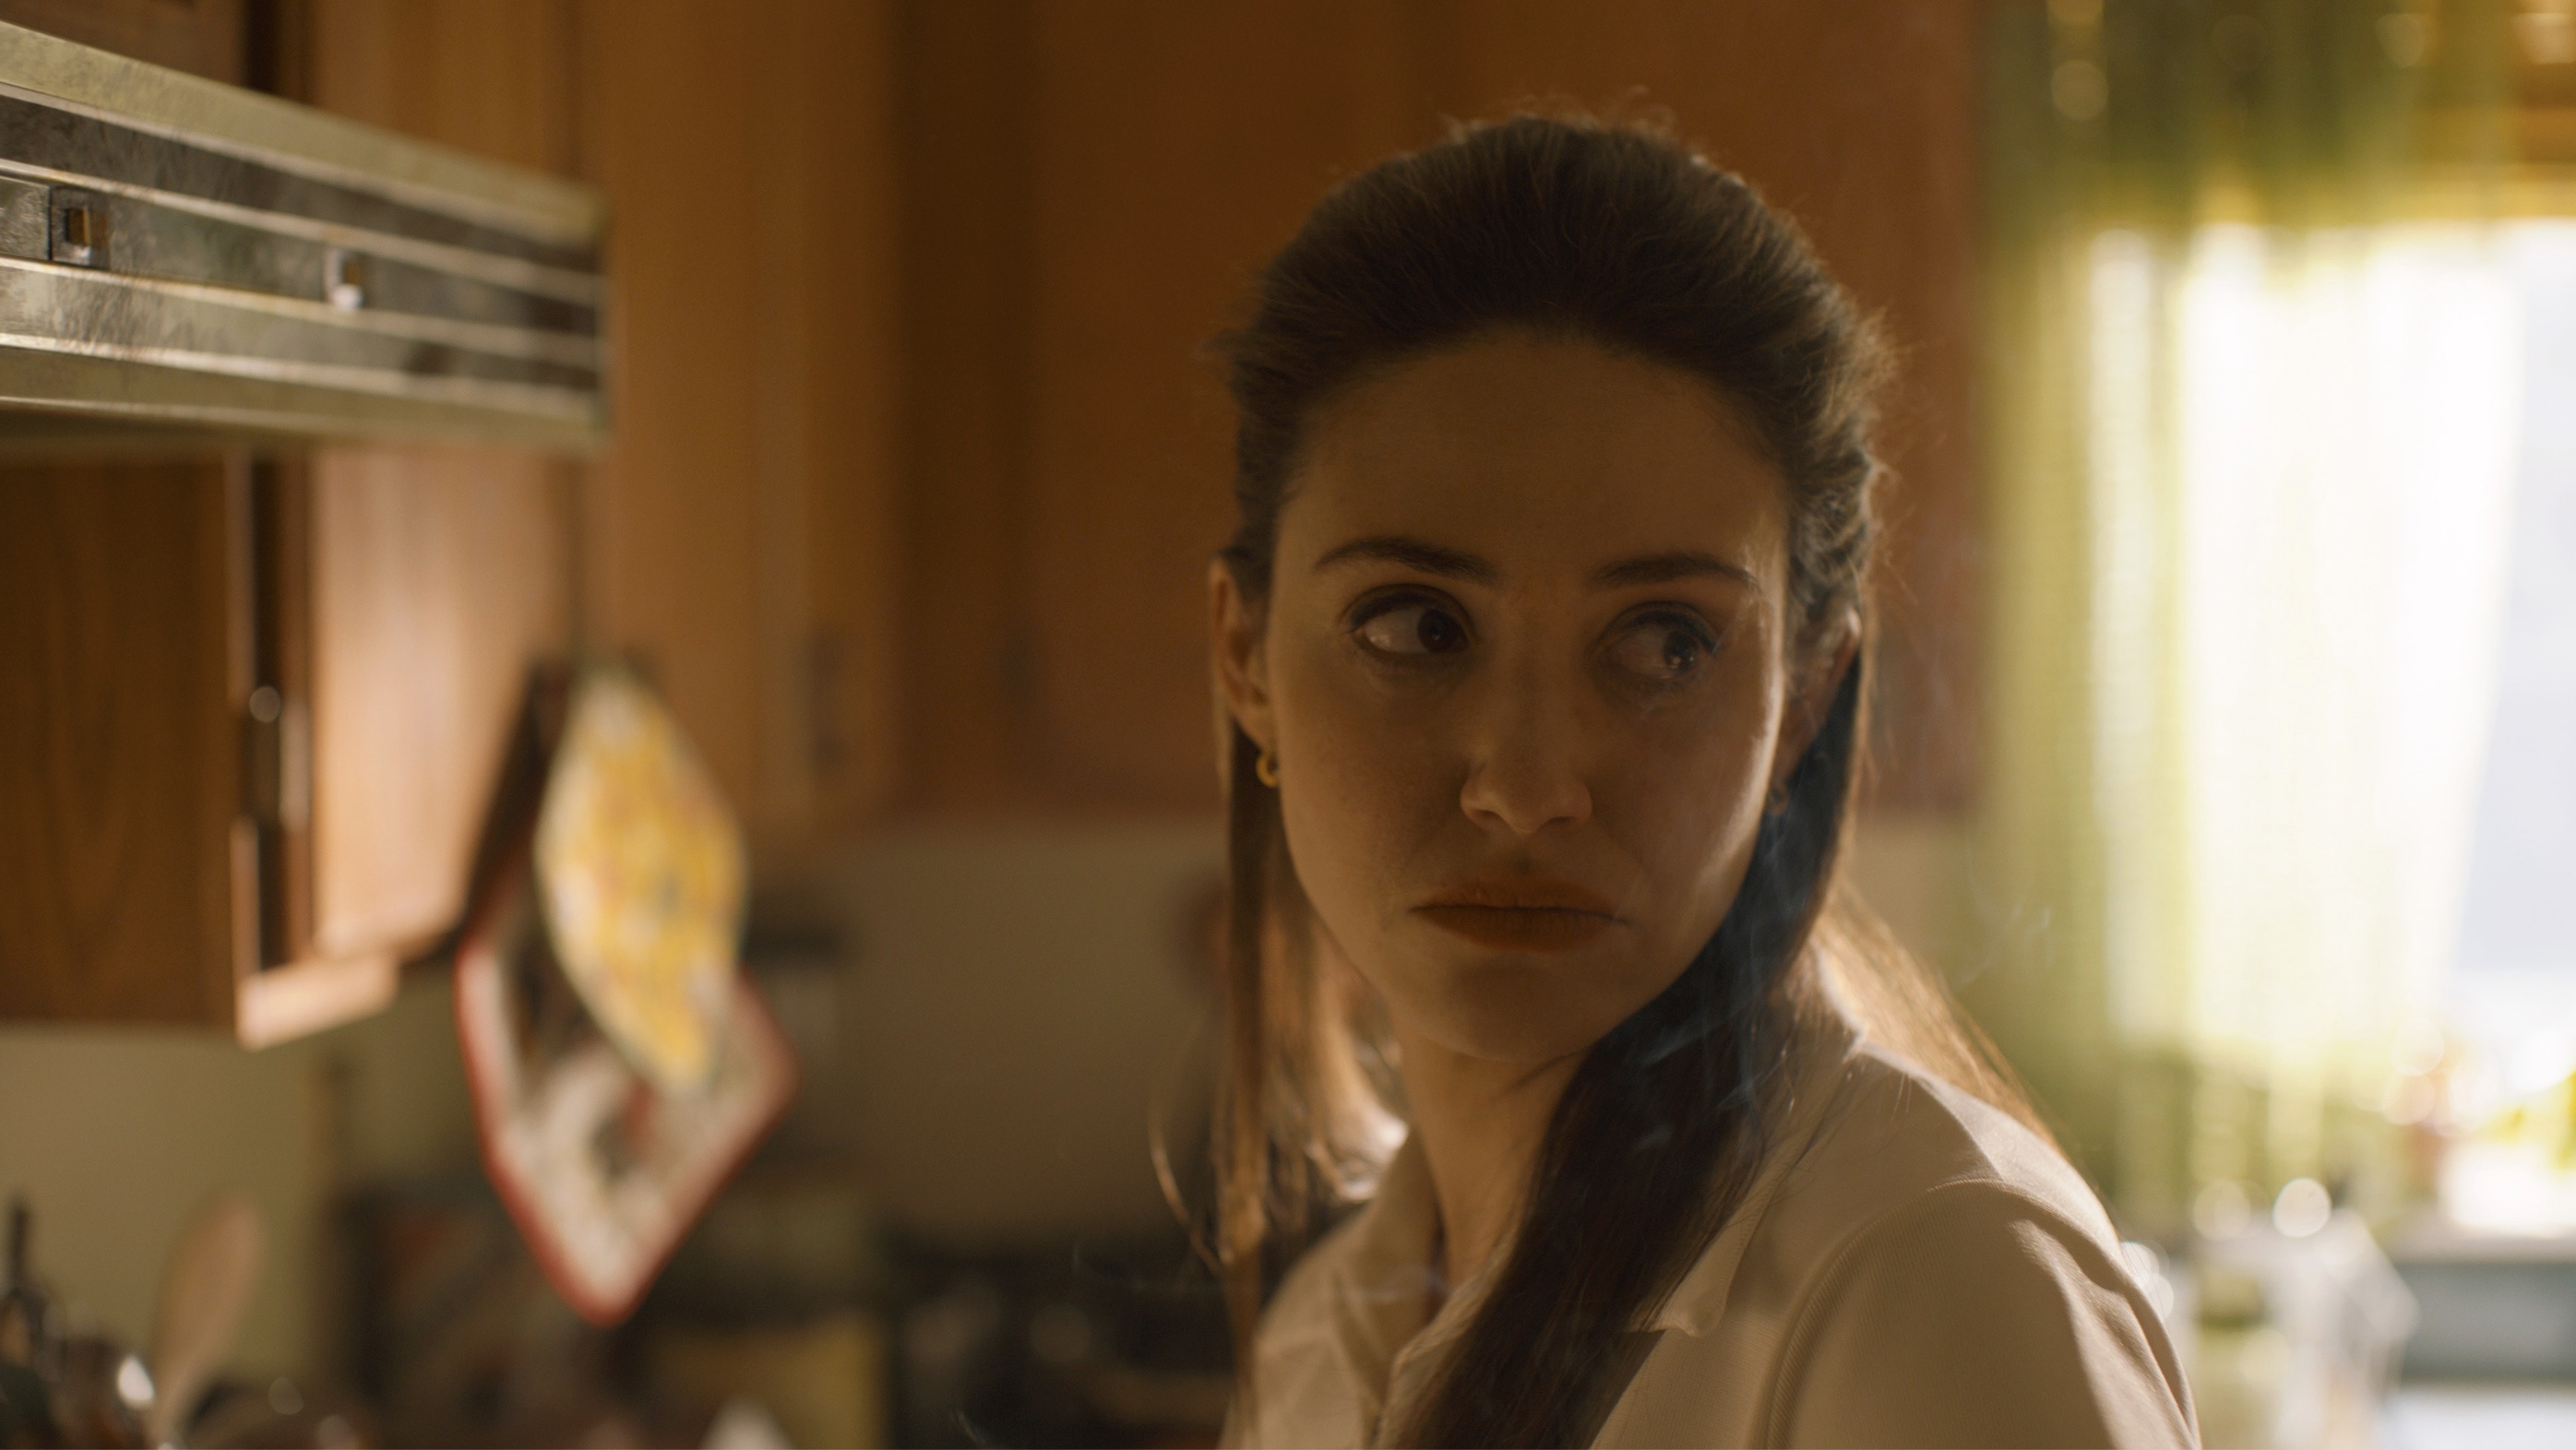 The Crowded Room Cast on Apple TV+ - Emmy Rossum as Candy Sullivan